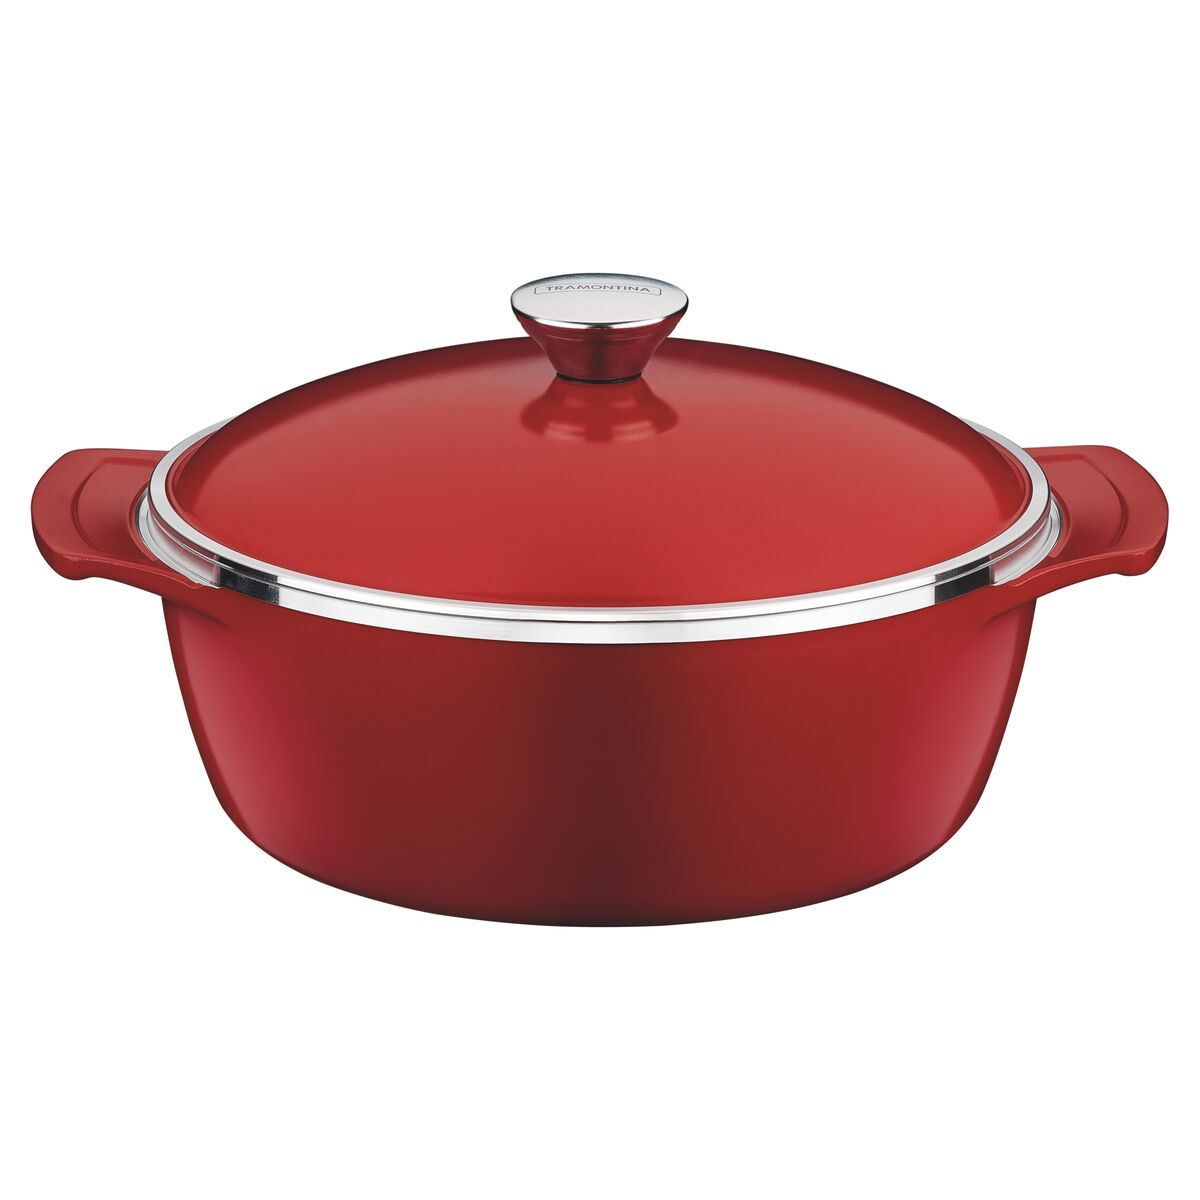 Tramontina Lyon forged aluminum, red casserole with interior Starflon High Performance nonstick coating and lid, 30 cm, 6.8 L